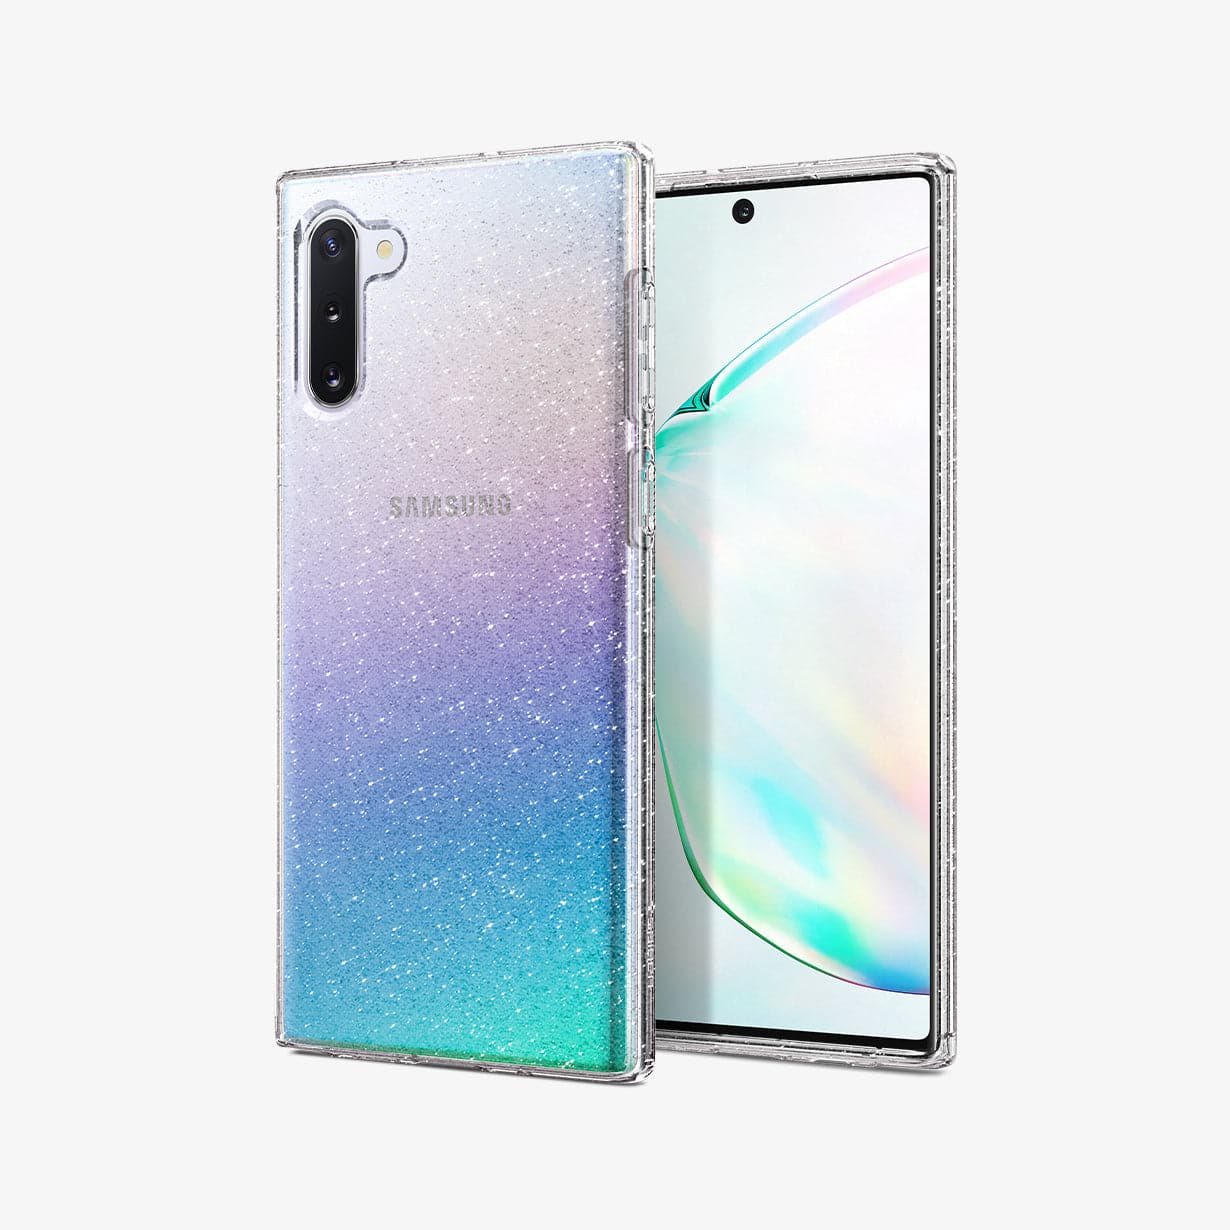 628CS27371 - Galaxy Note 10 Series Liquid Crystal Glitter Case in crystal quartz showing the back and front